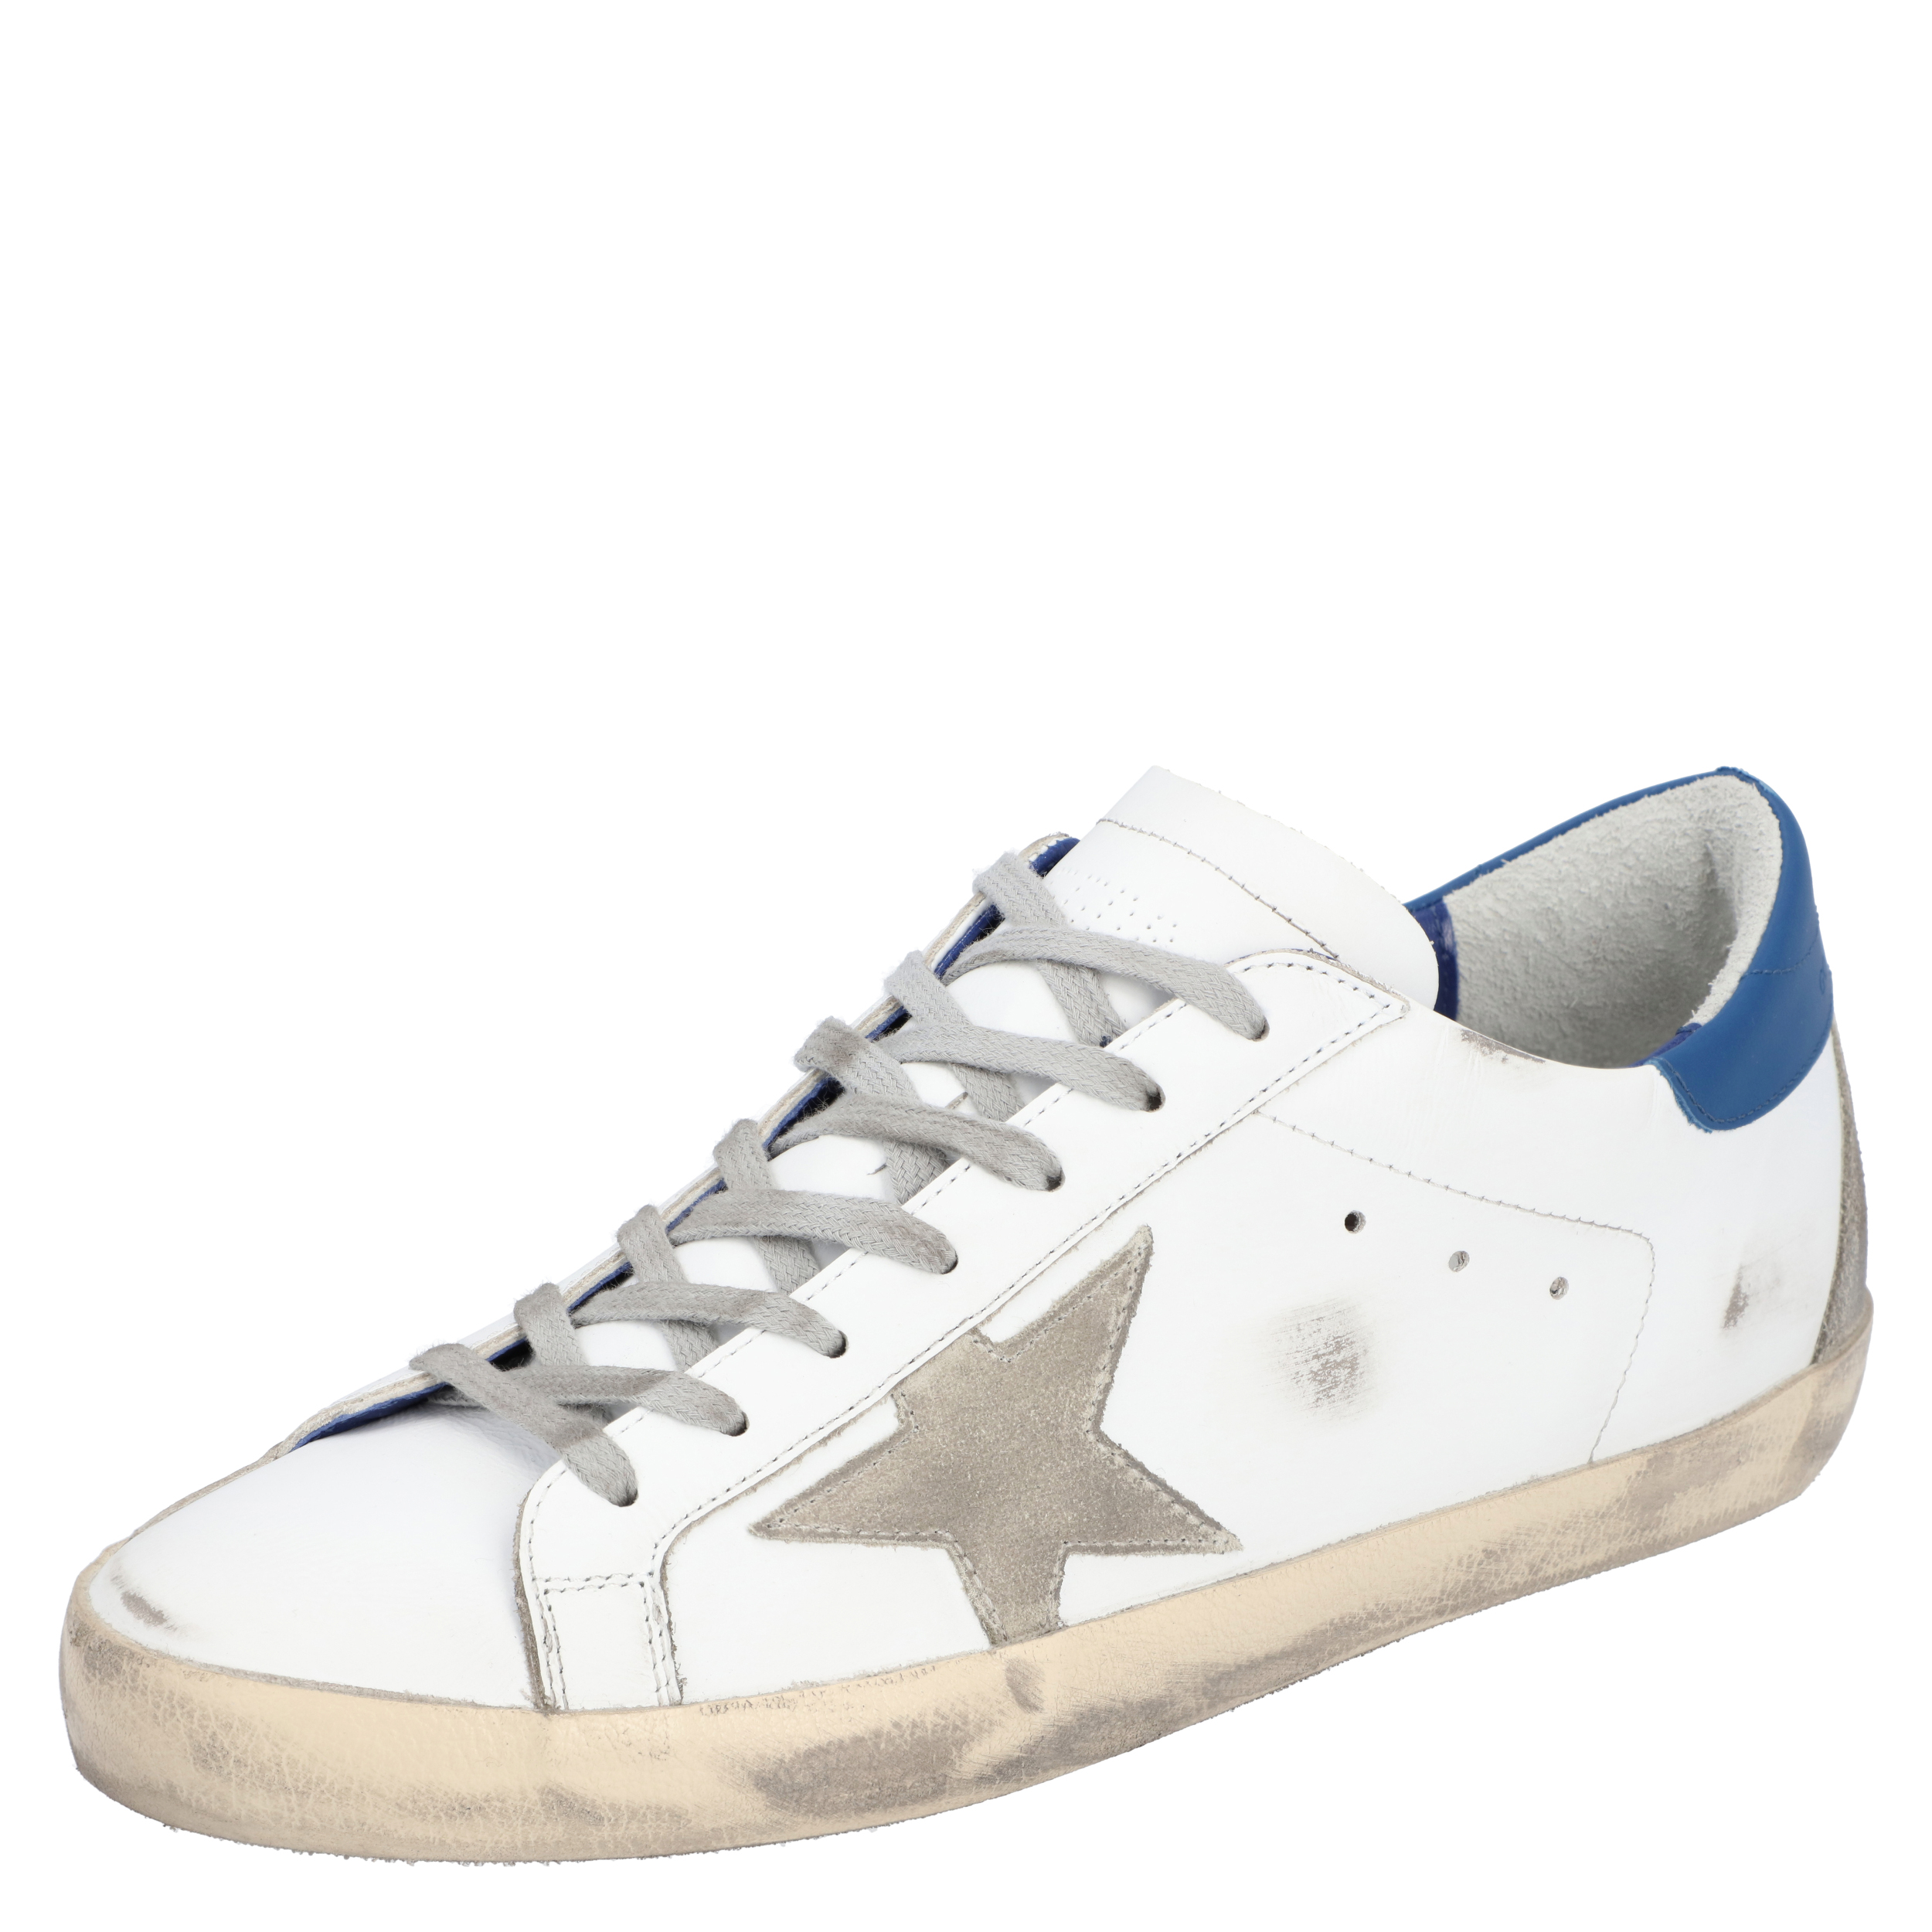 Golden Goose White/Blue Leather Superstar Sneakers Size EU 41